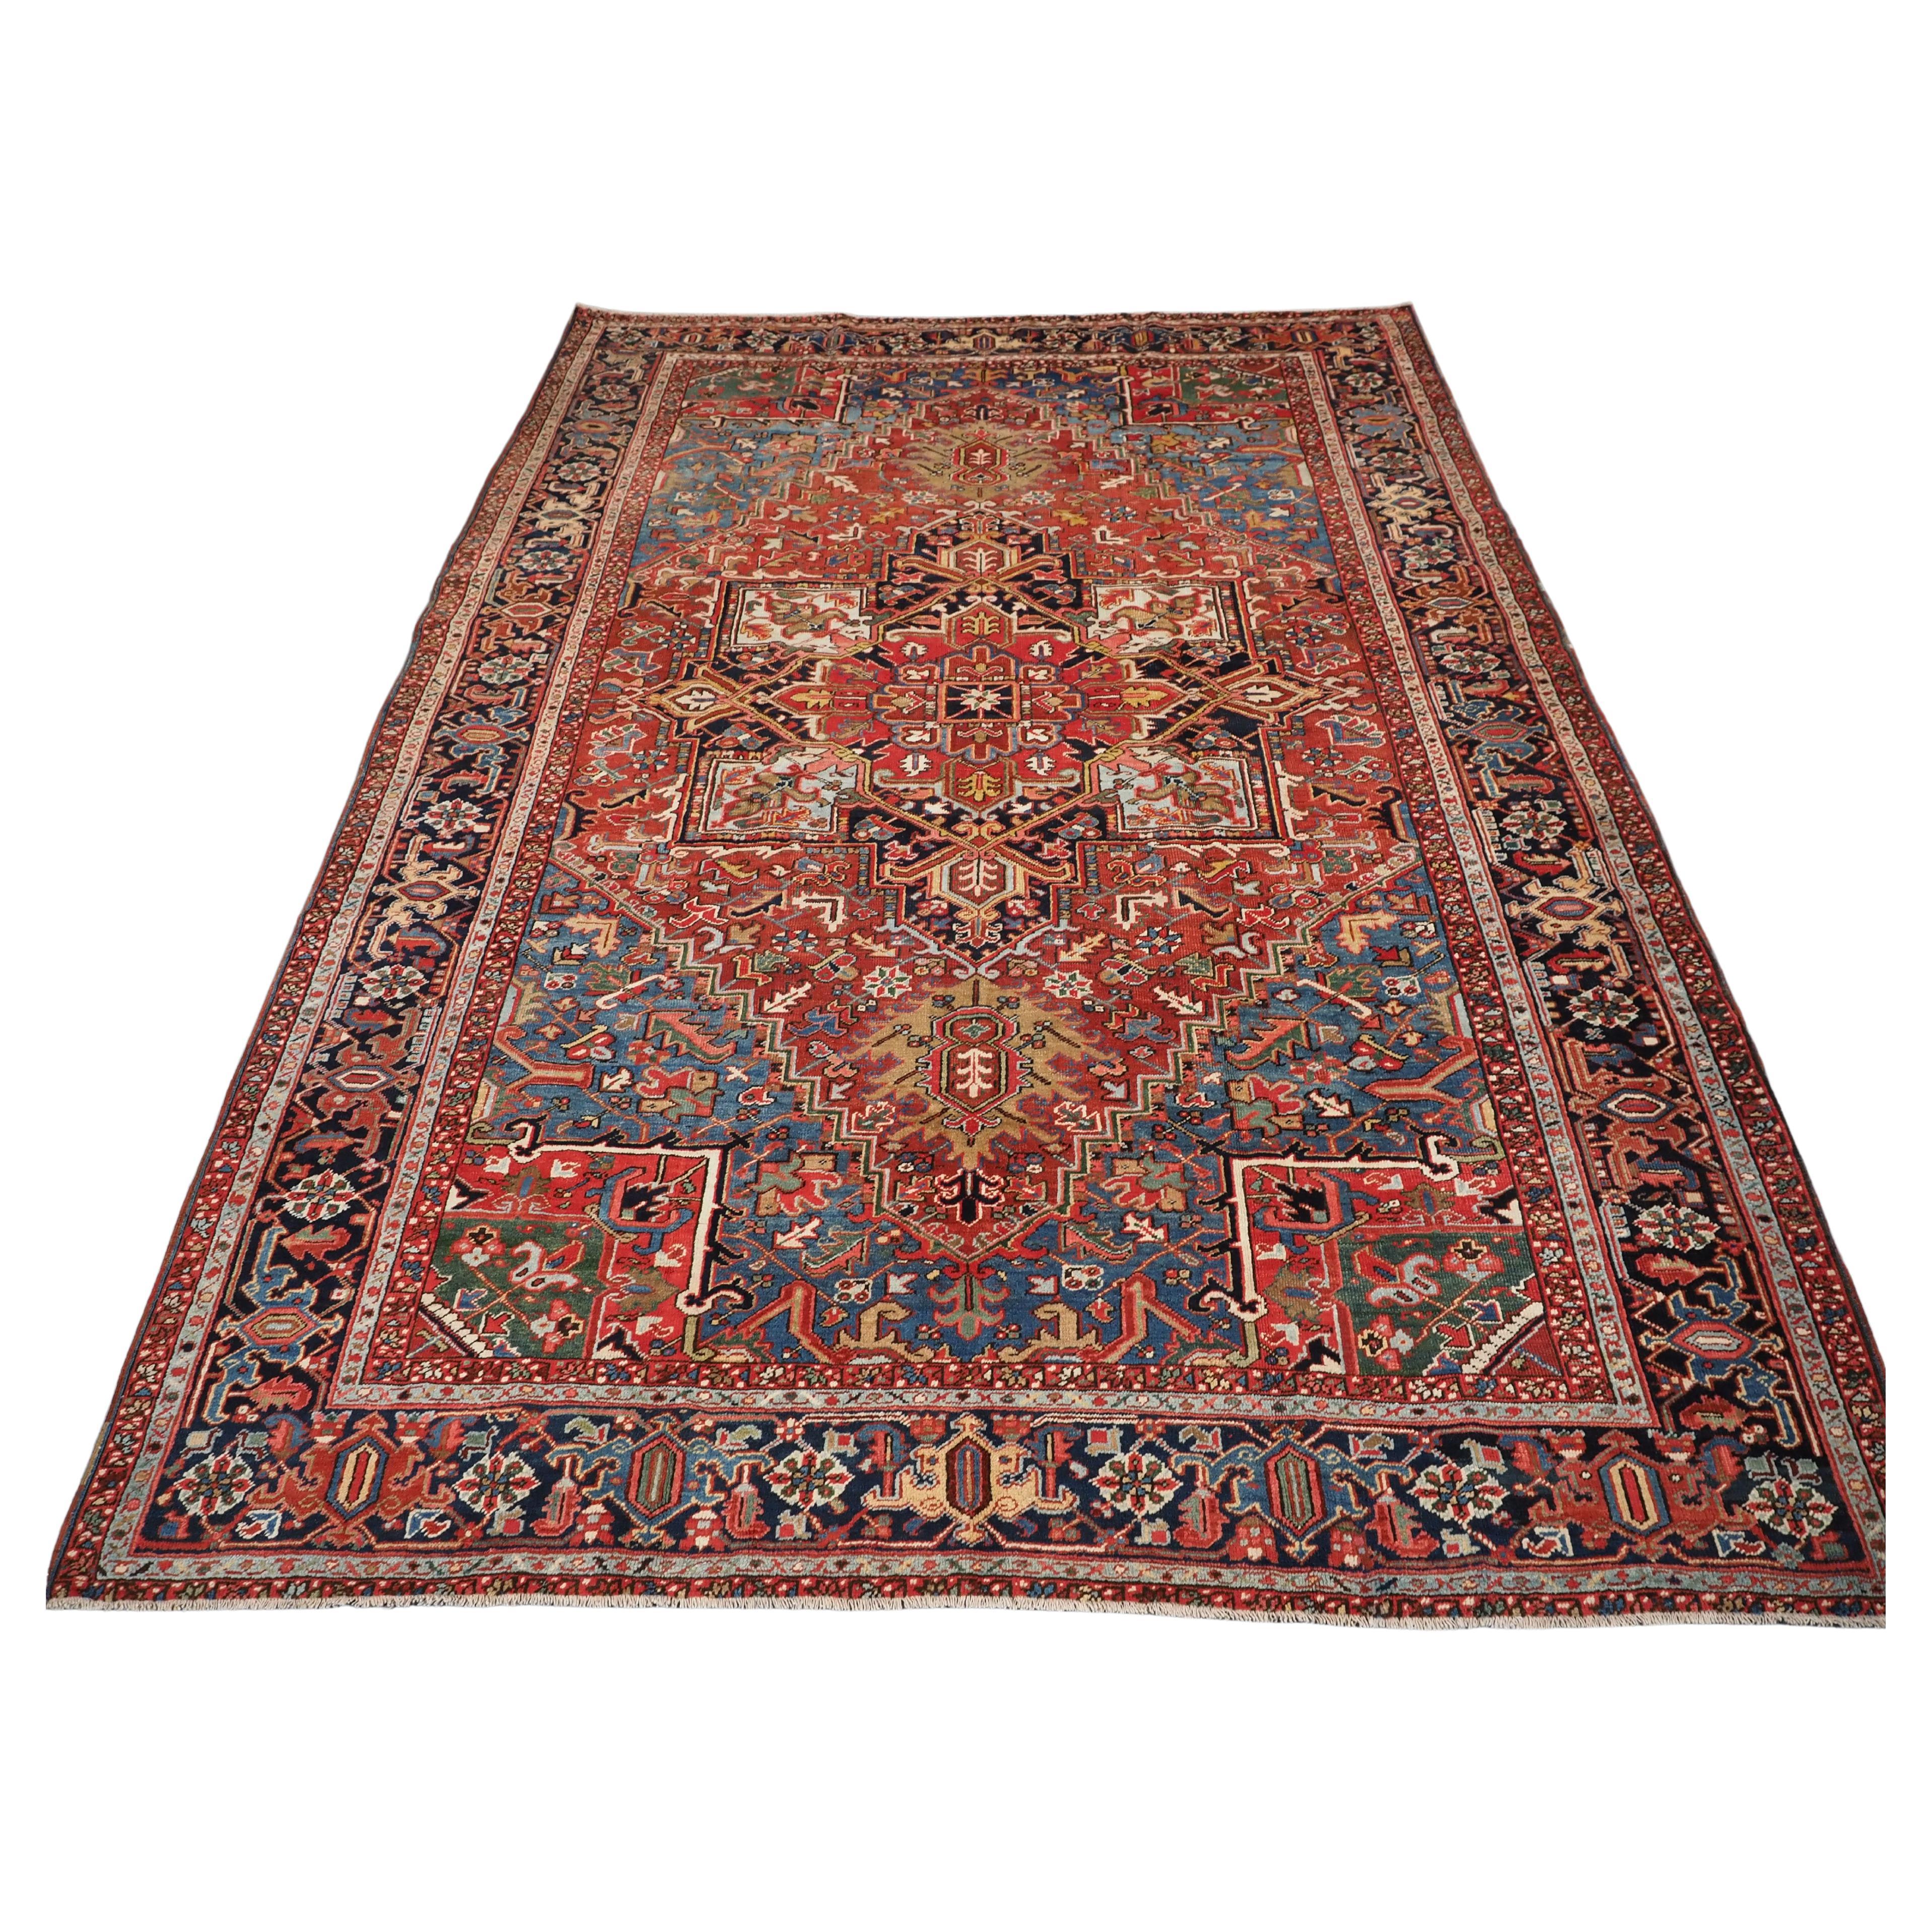 Antique Heriz carpet with a very well-drawn large medallion, circa 1900.